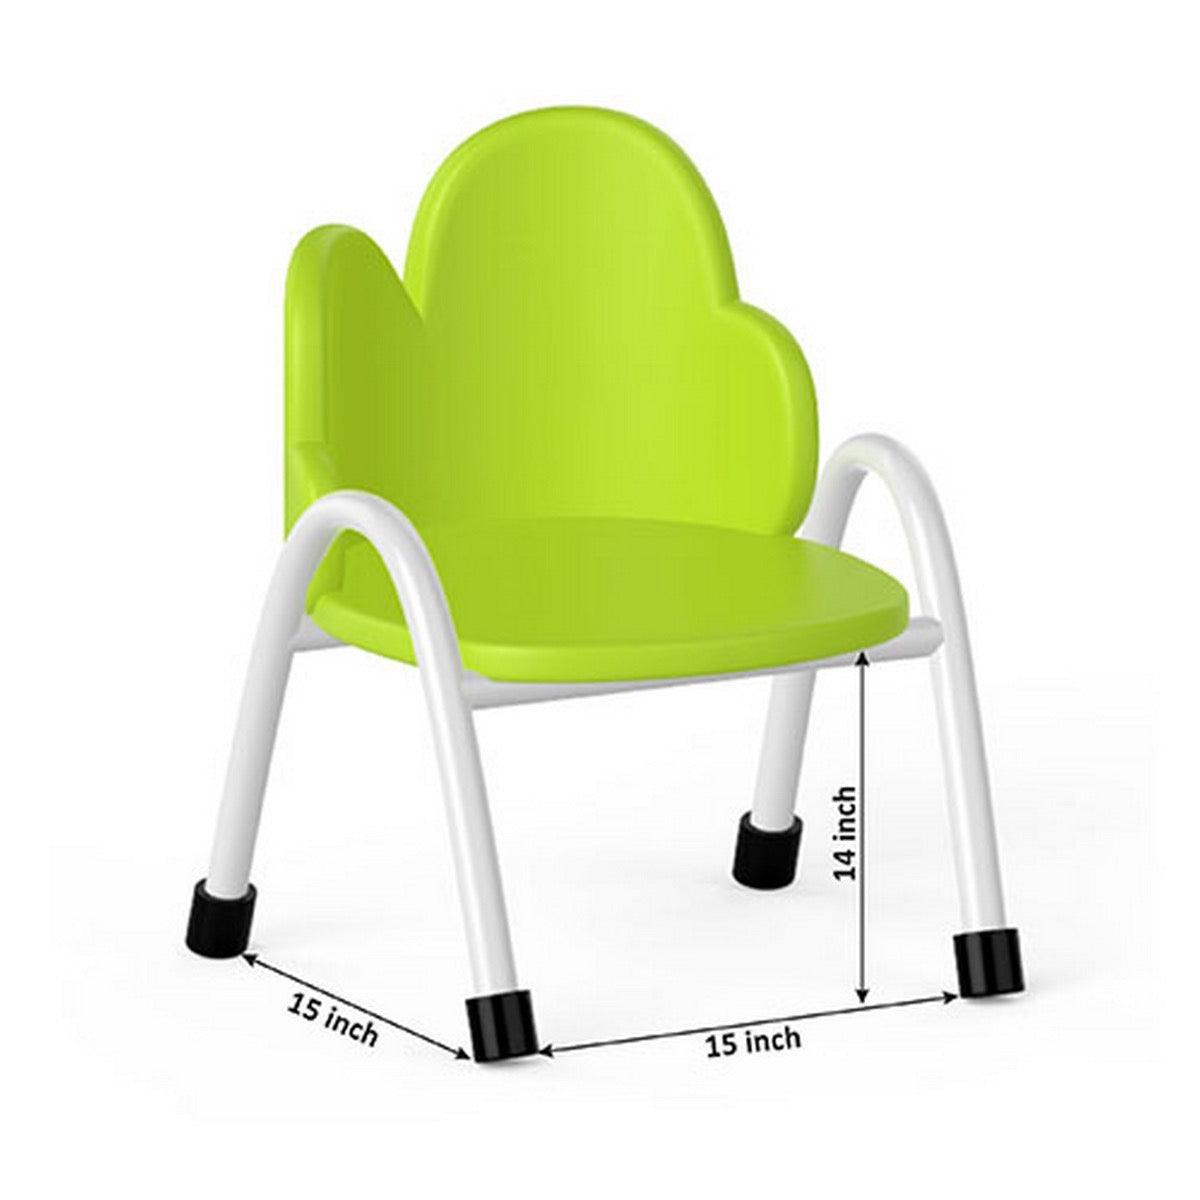 Ok Play Cloud Chair, Study Chair, Sturdy And Durable Chair, Plastic Chair, Perfect For Home, Creches And School, Green, 5 to 10 Years, Height 14 Inches